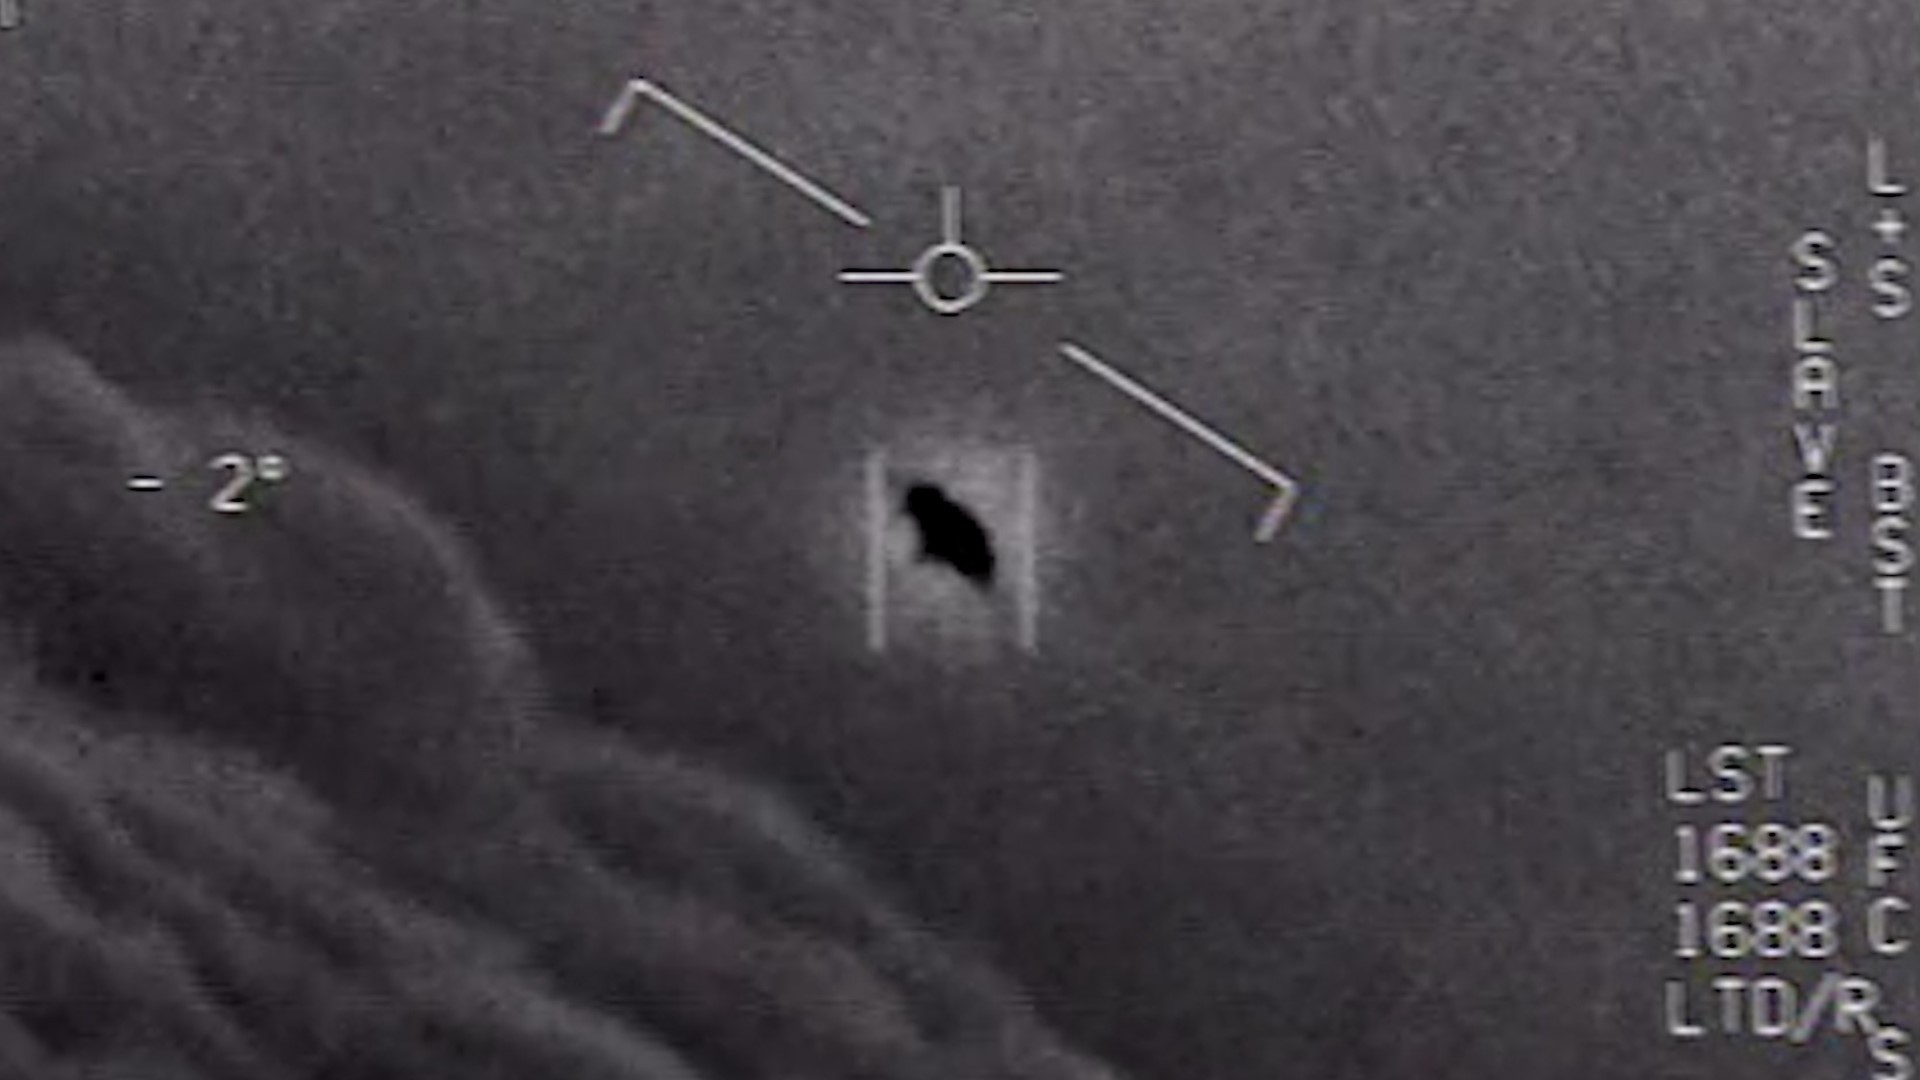 After military UFO videos took the internet by storm, the U.S. Department of Defense released 'hazard reports' detailing pilot's interactions with 'unidentified aerial phenomena.'